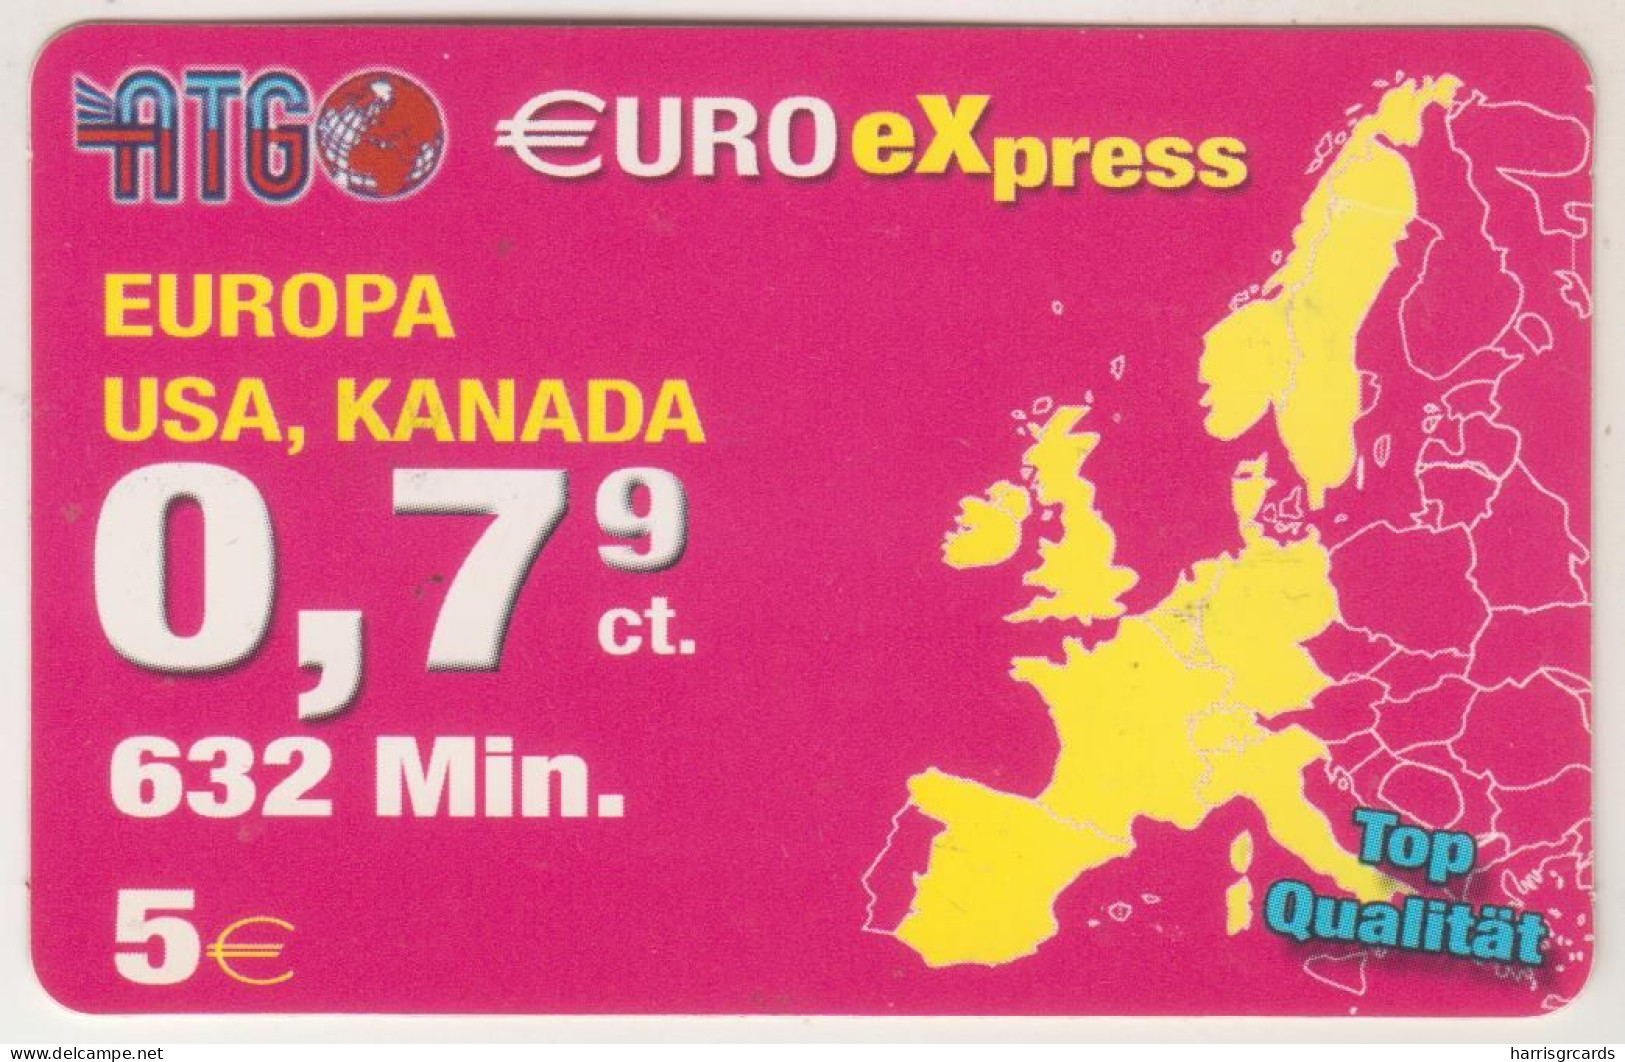 GERMANY - ATG - €uro Express (0,79 Cent / 632 Min.) , Prepaid Card ,5 $, Used - GSM, Cartes Prepayées & Recharges